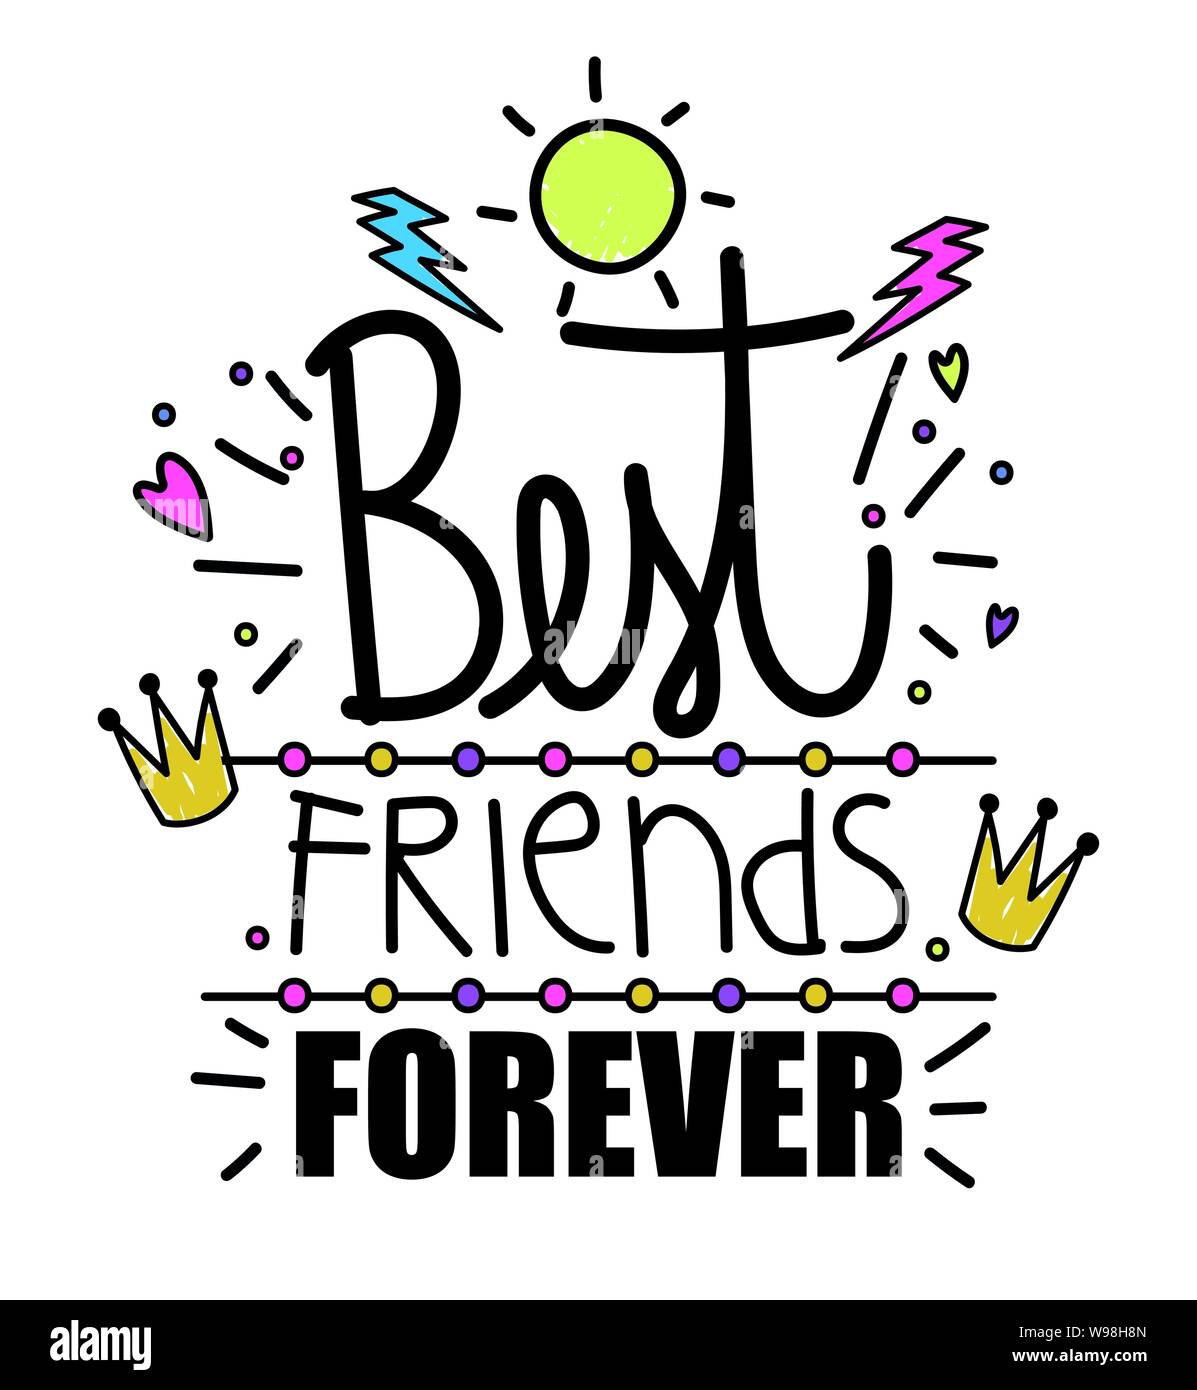 Bff Wallpapers For 3